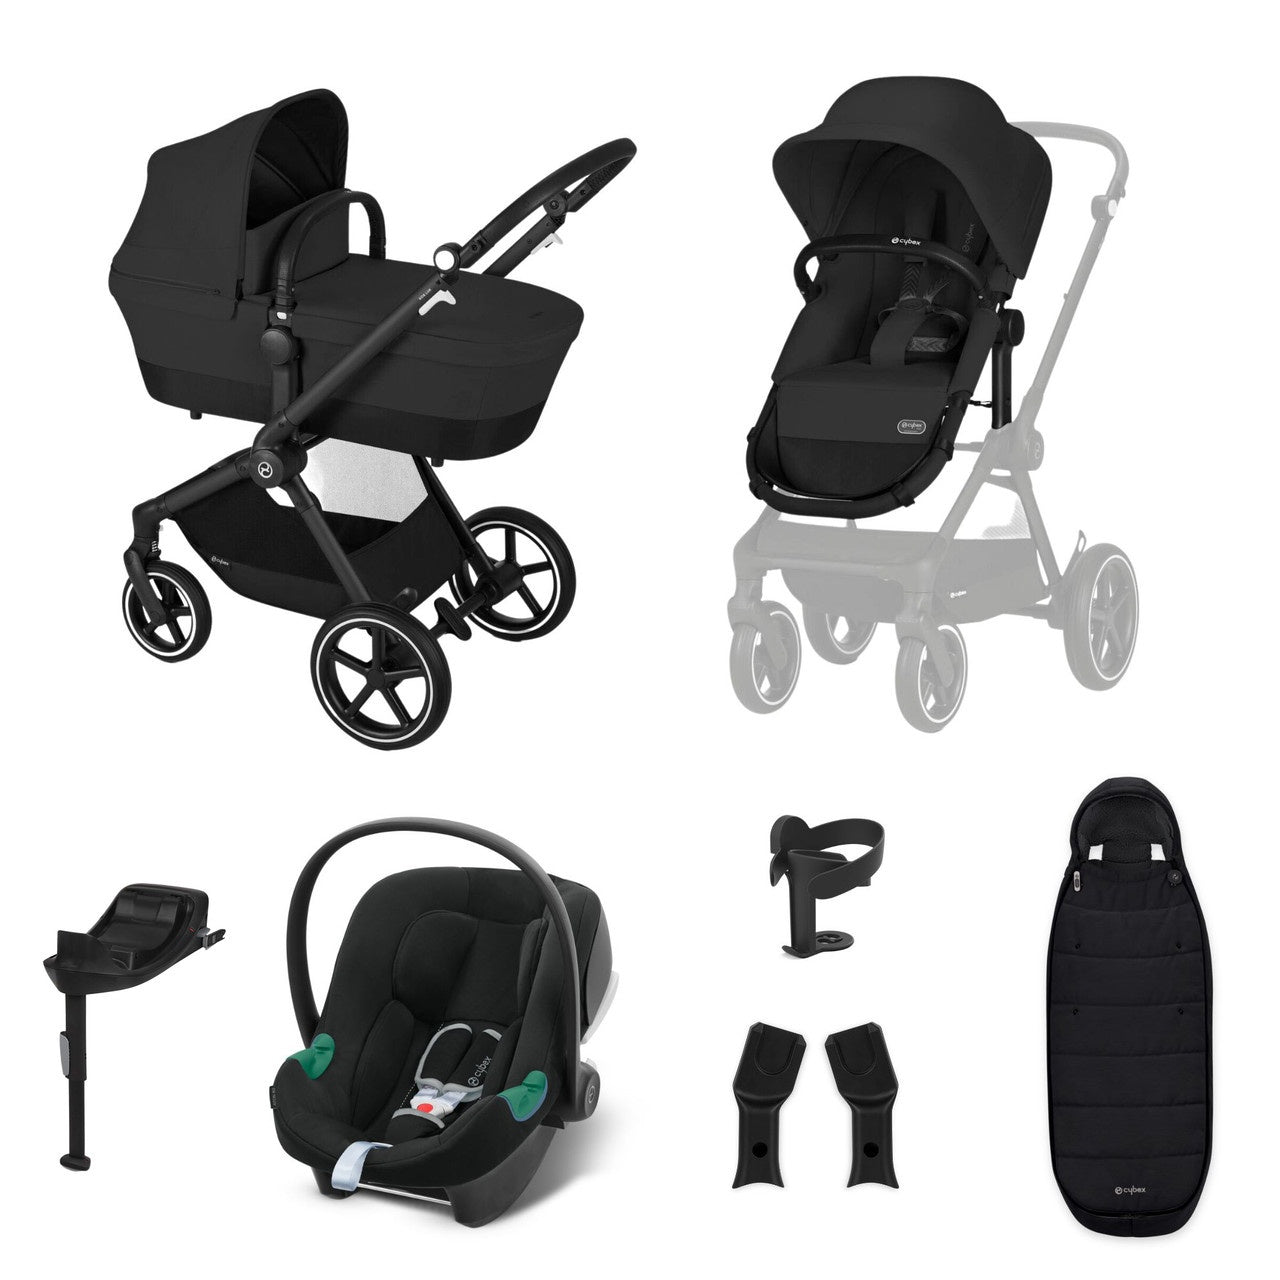 Cybex Eos Lux Bundle With Aton B2 Car Seat And Base c/w Footmuff / Car Seat Adaptors/ Cup Holder